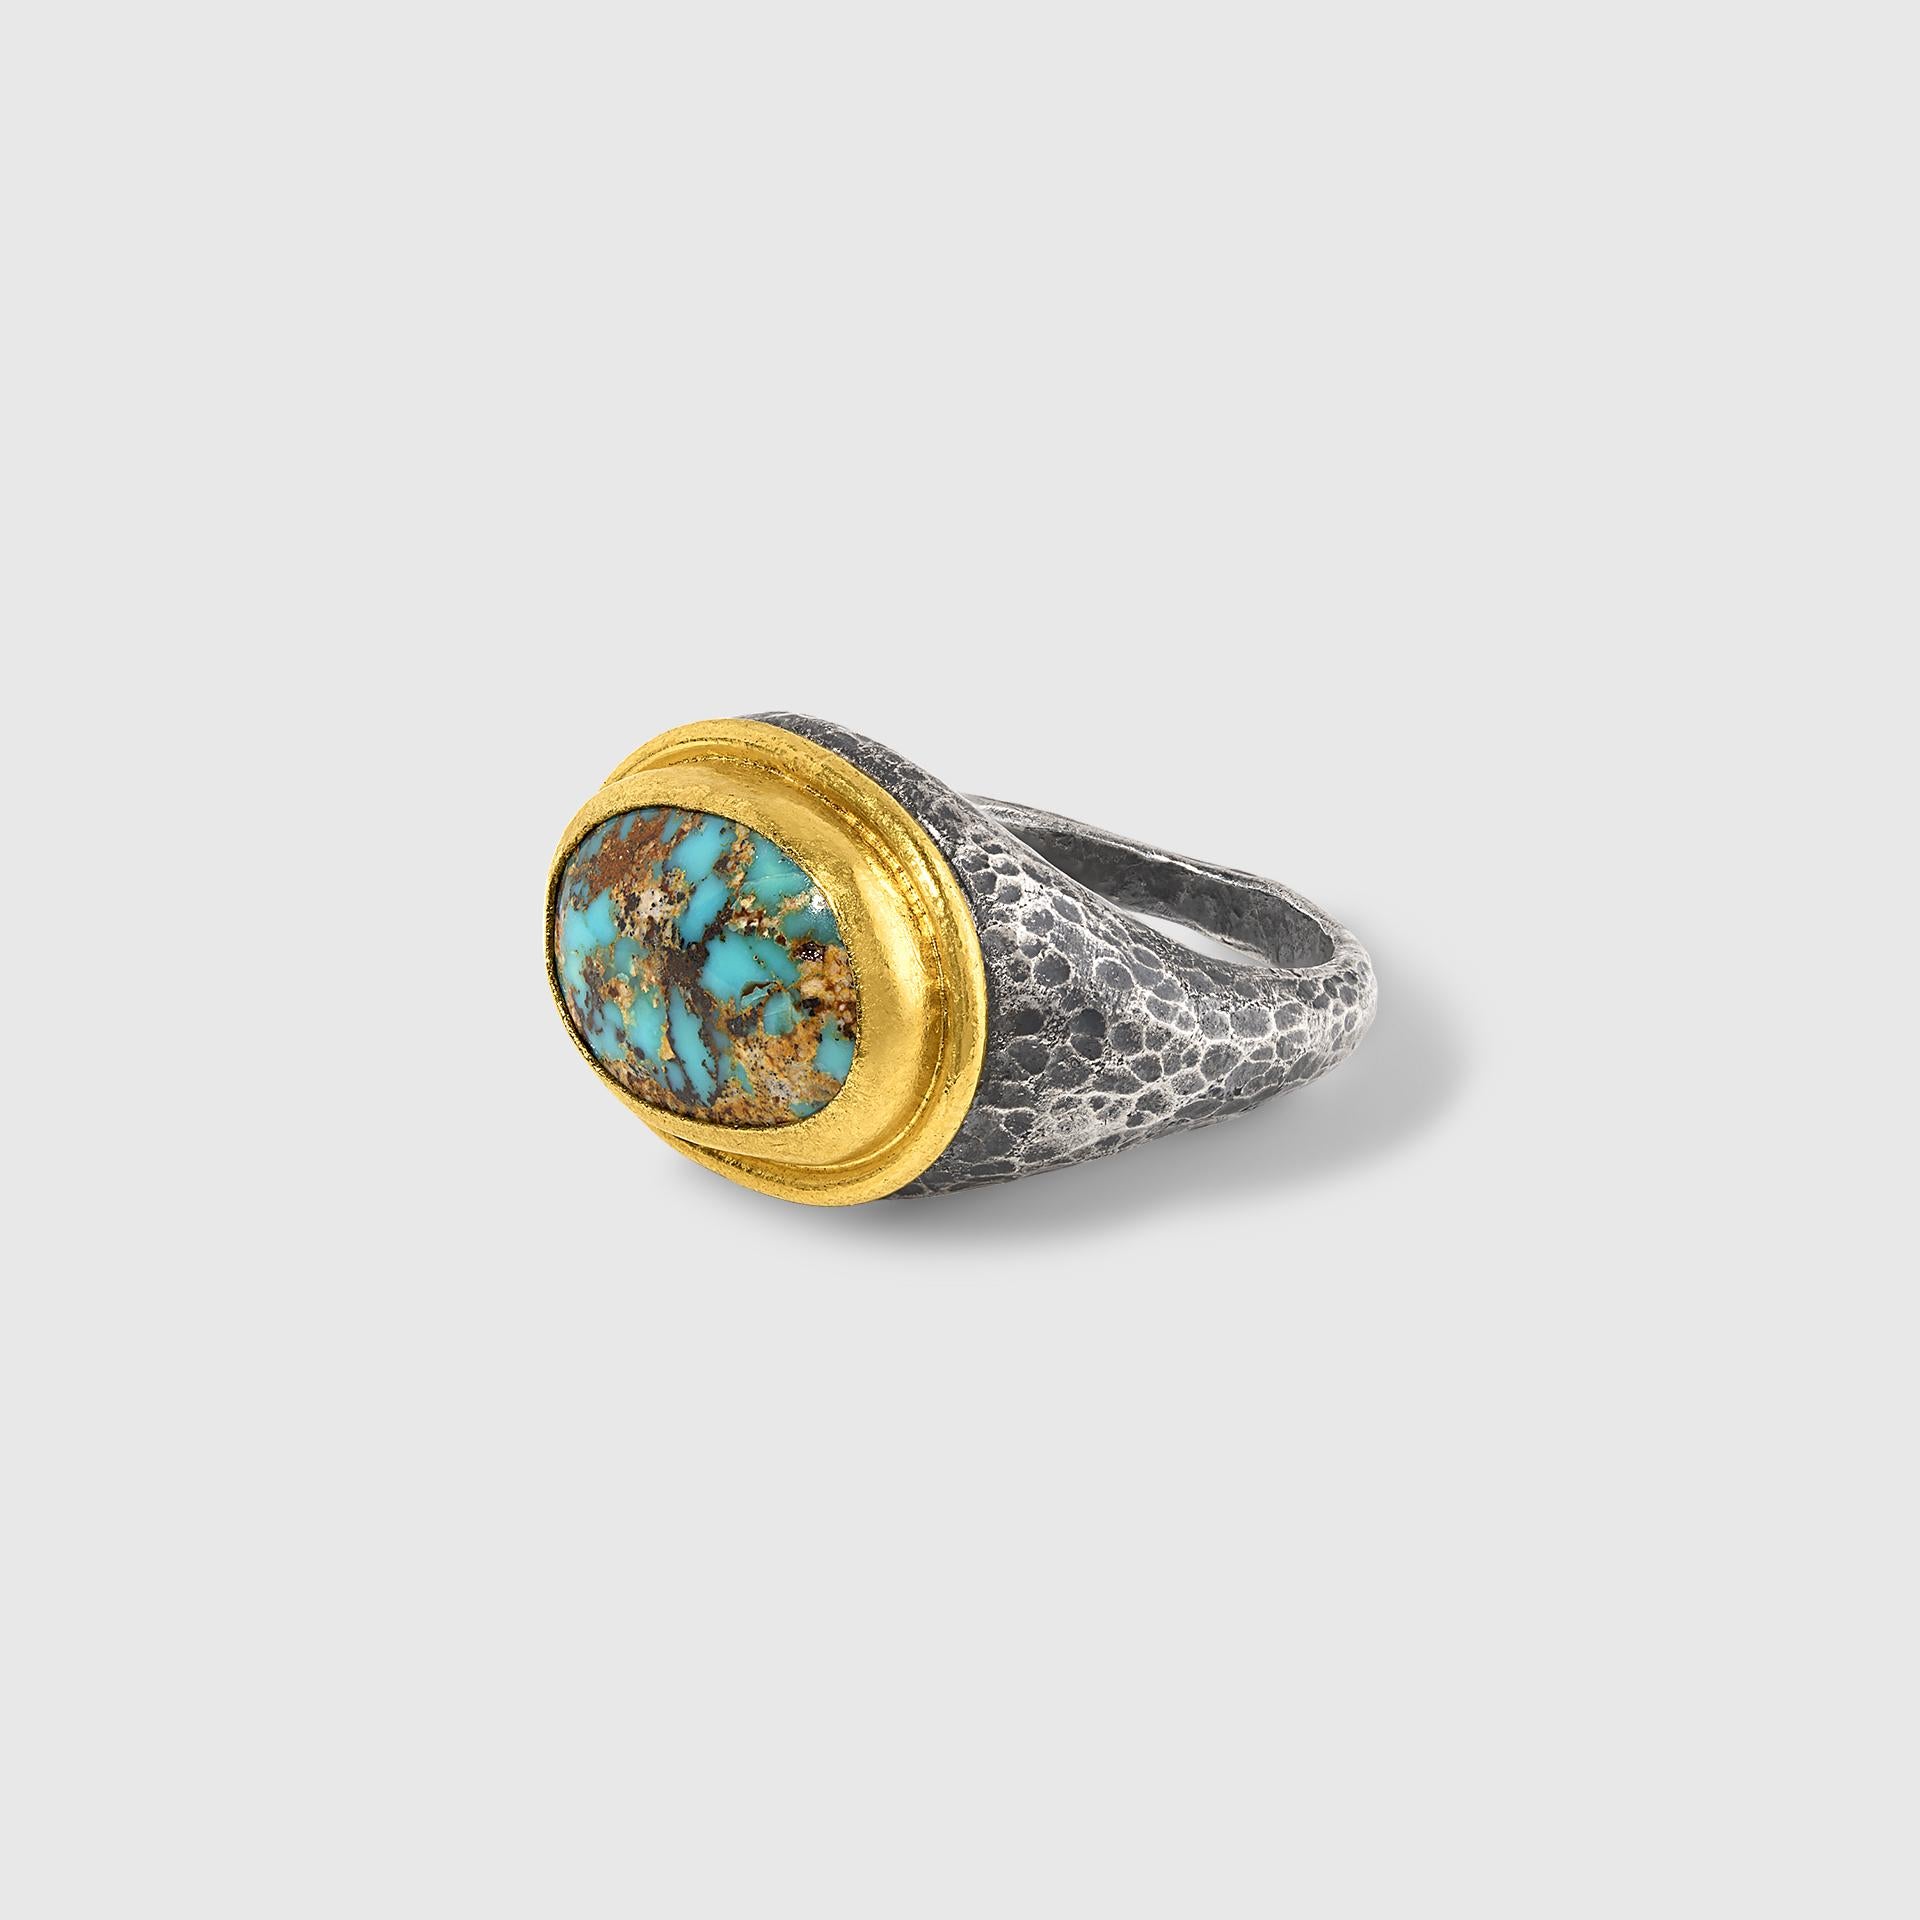 1 Carat Organic Oval Turquoise Brown Teal Green Ring 24K Gold & Sterling
Unisex 24K, Sterling Ring Handmade by Prehistoric Works
Ring details:
Turquoise - 1 ct
24K Gold - 1.90 grams
Sterling S925 - 8 grams